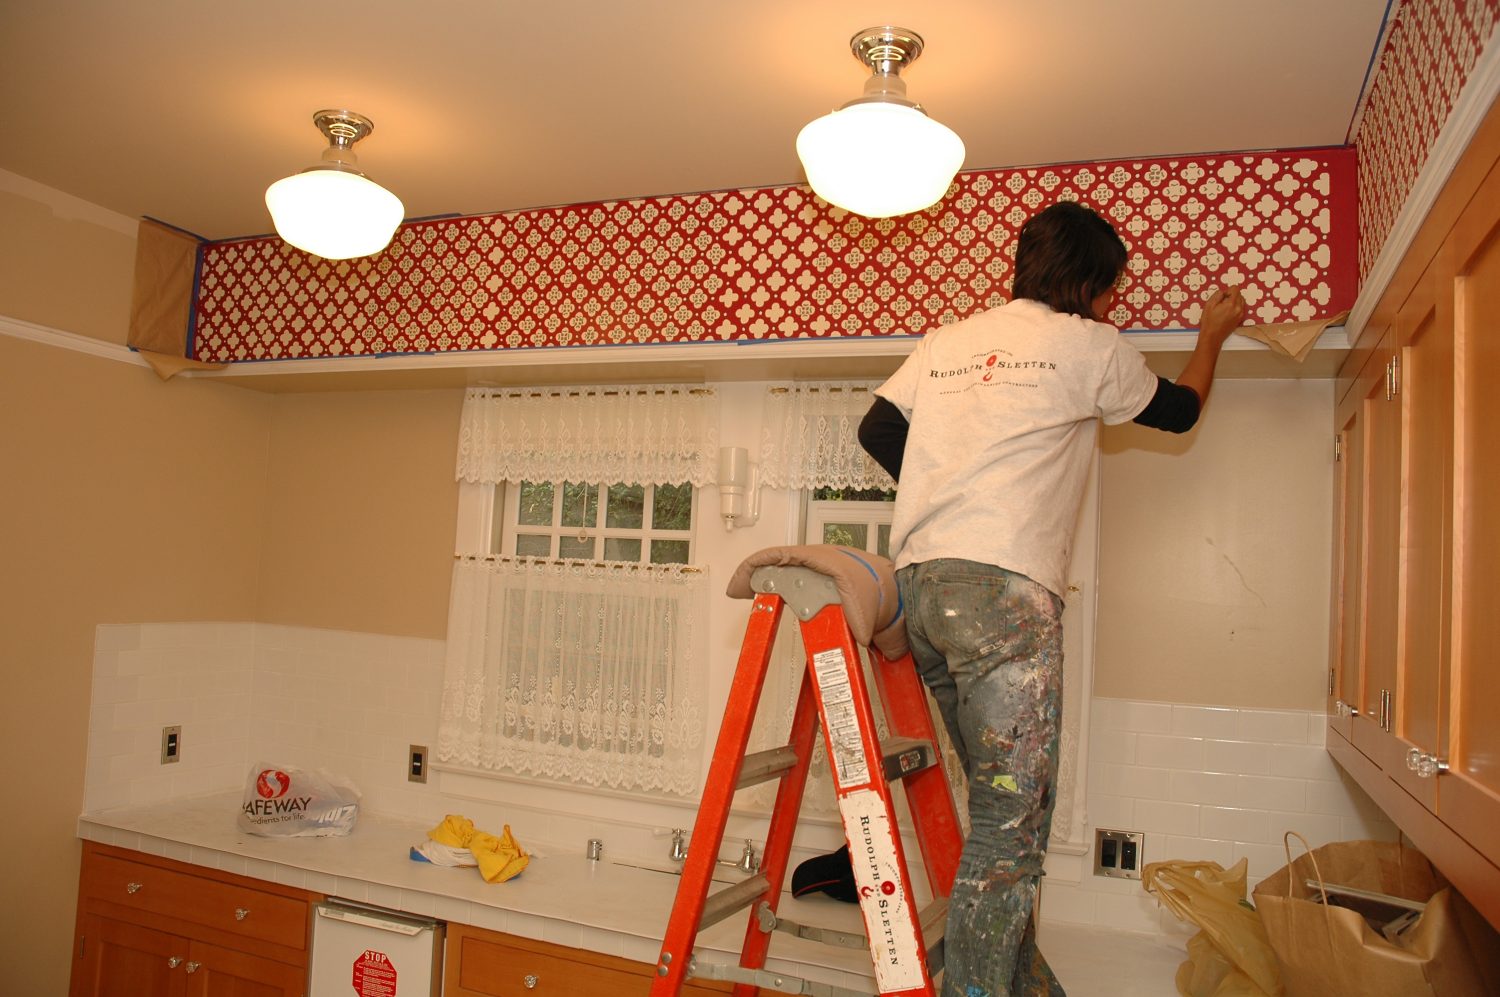 Photo of a worker painting a pattern in the Addison Avenue kitchen to replicate the wallpaper from the Packards' time there.